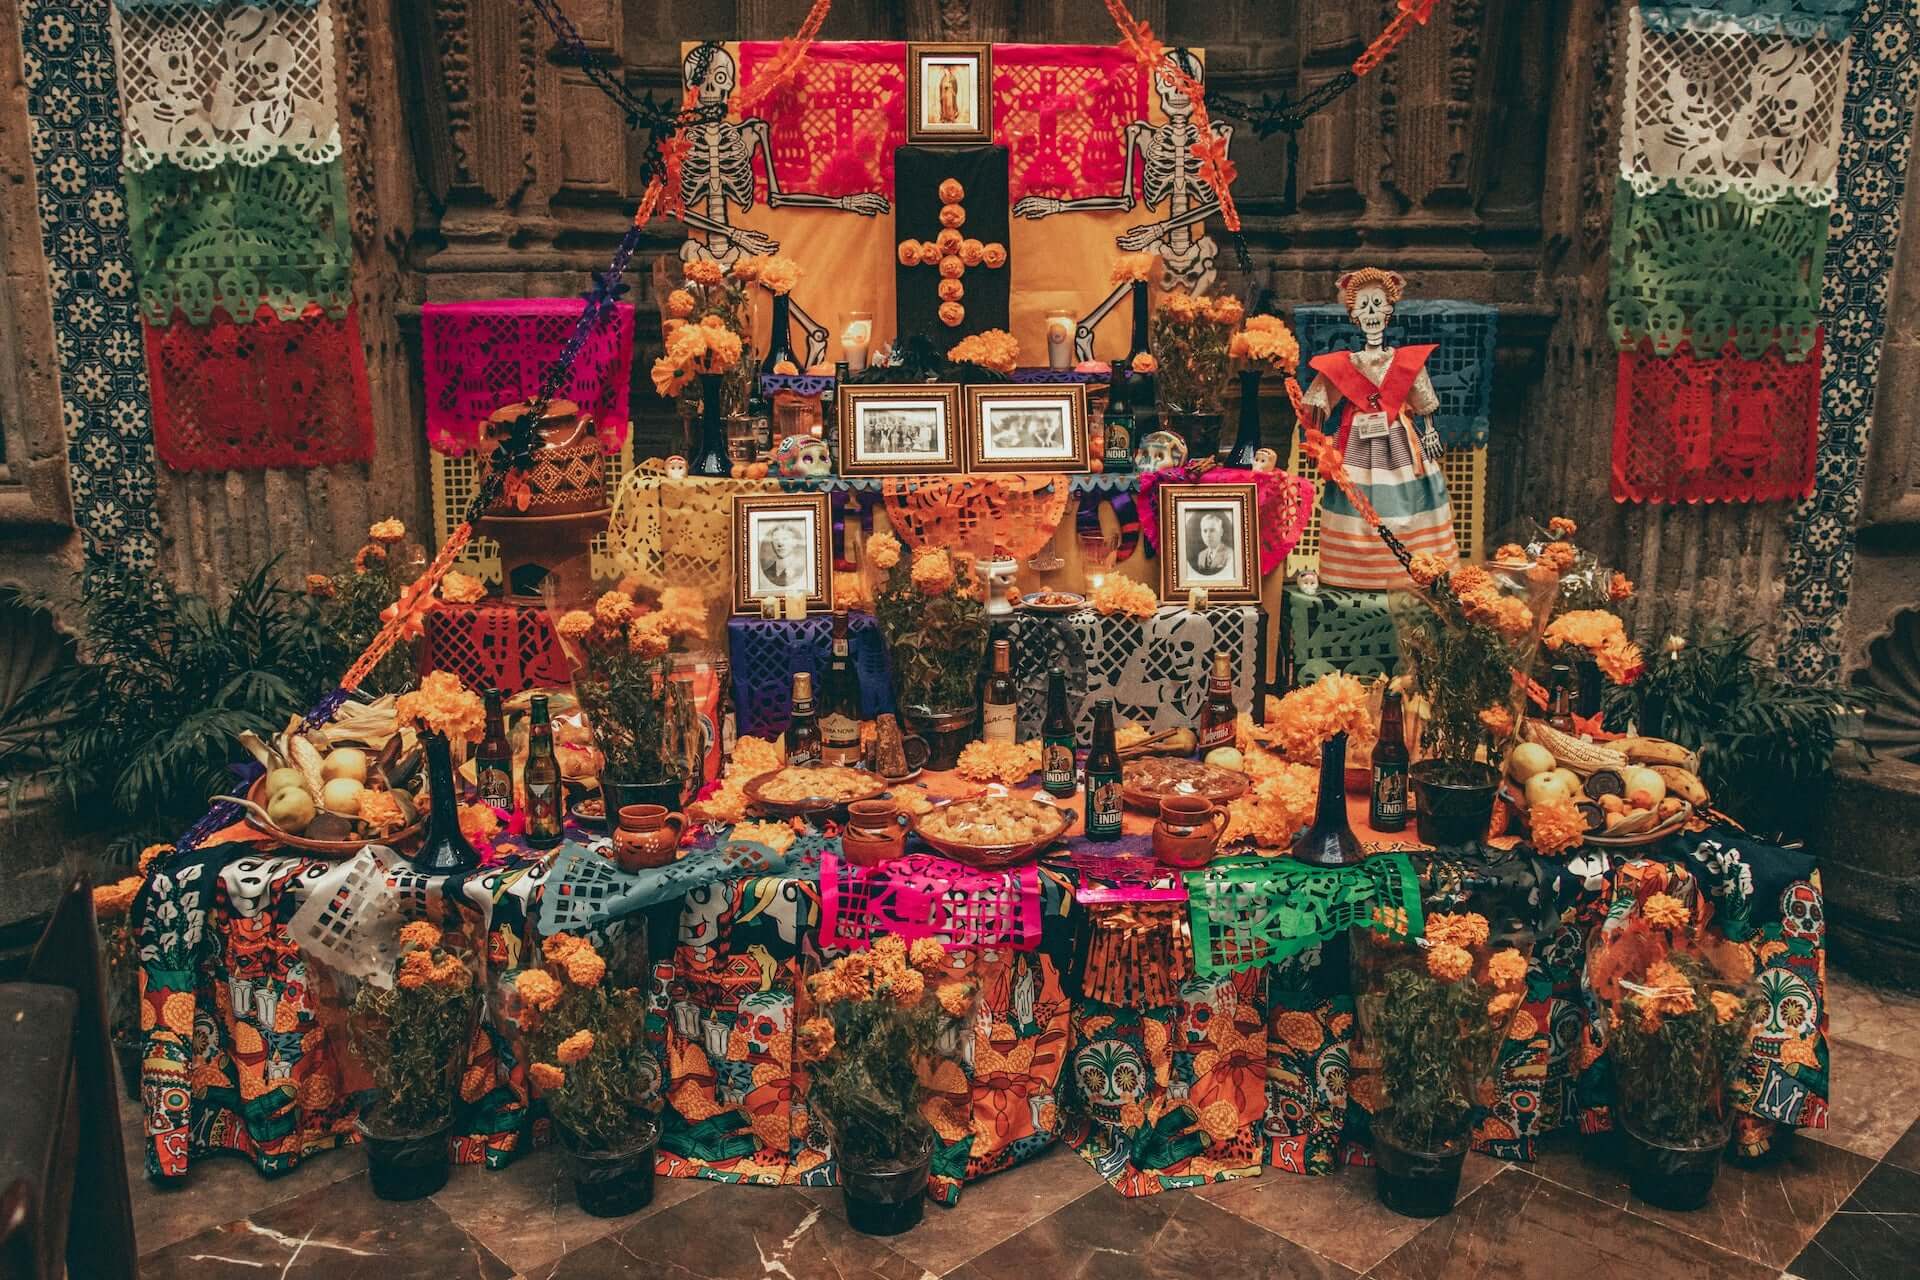 A Dia de los Muertos ofrenda full of flowers, food, and pictures of passed on loved ones.